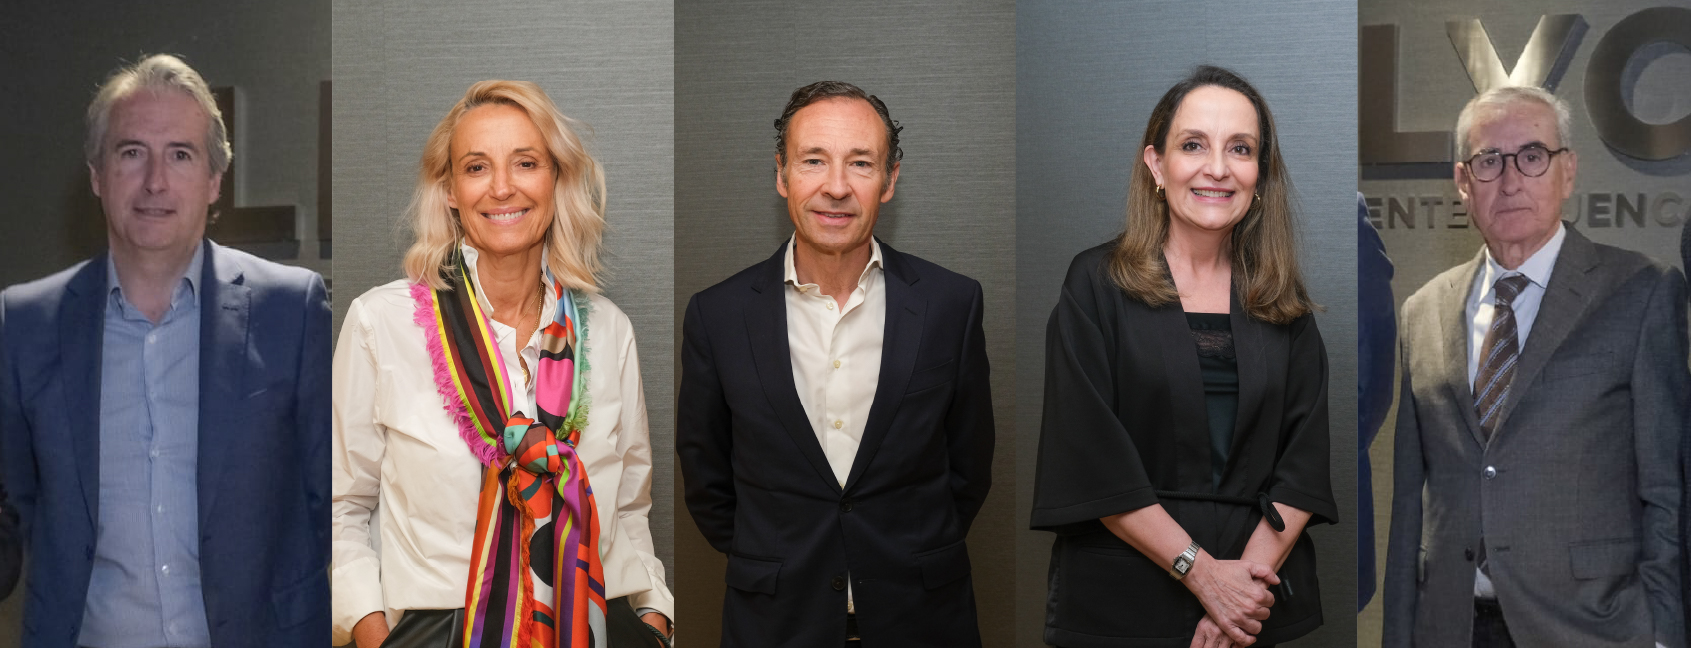 LLYC adds five prestigious professionals to its Advisory Board in Spain